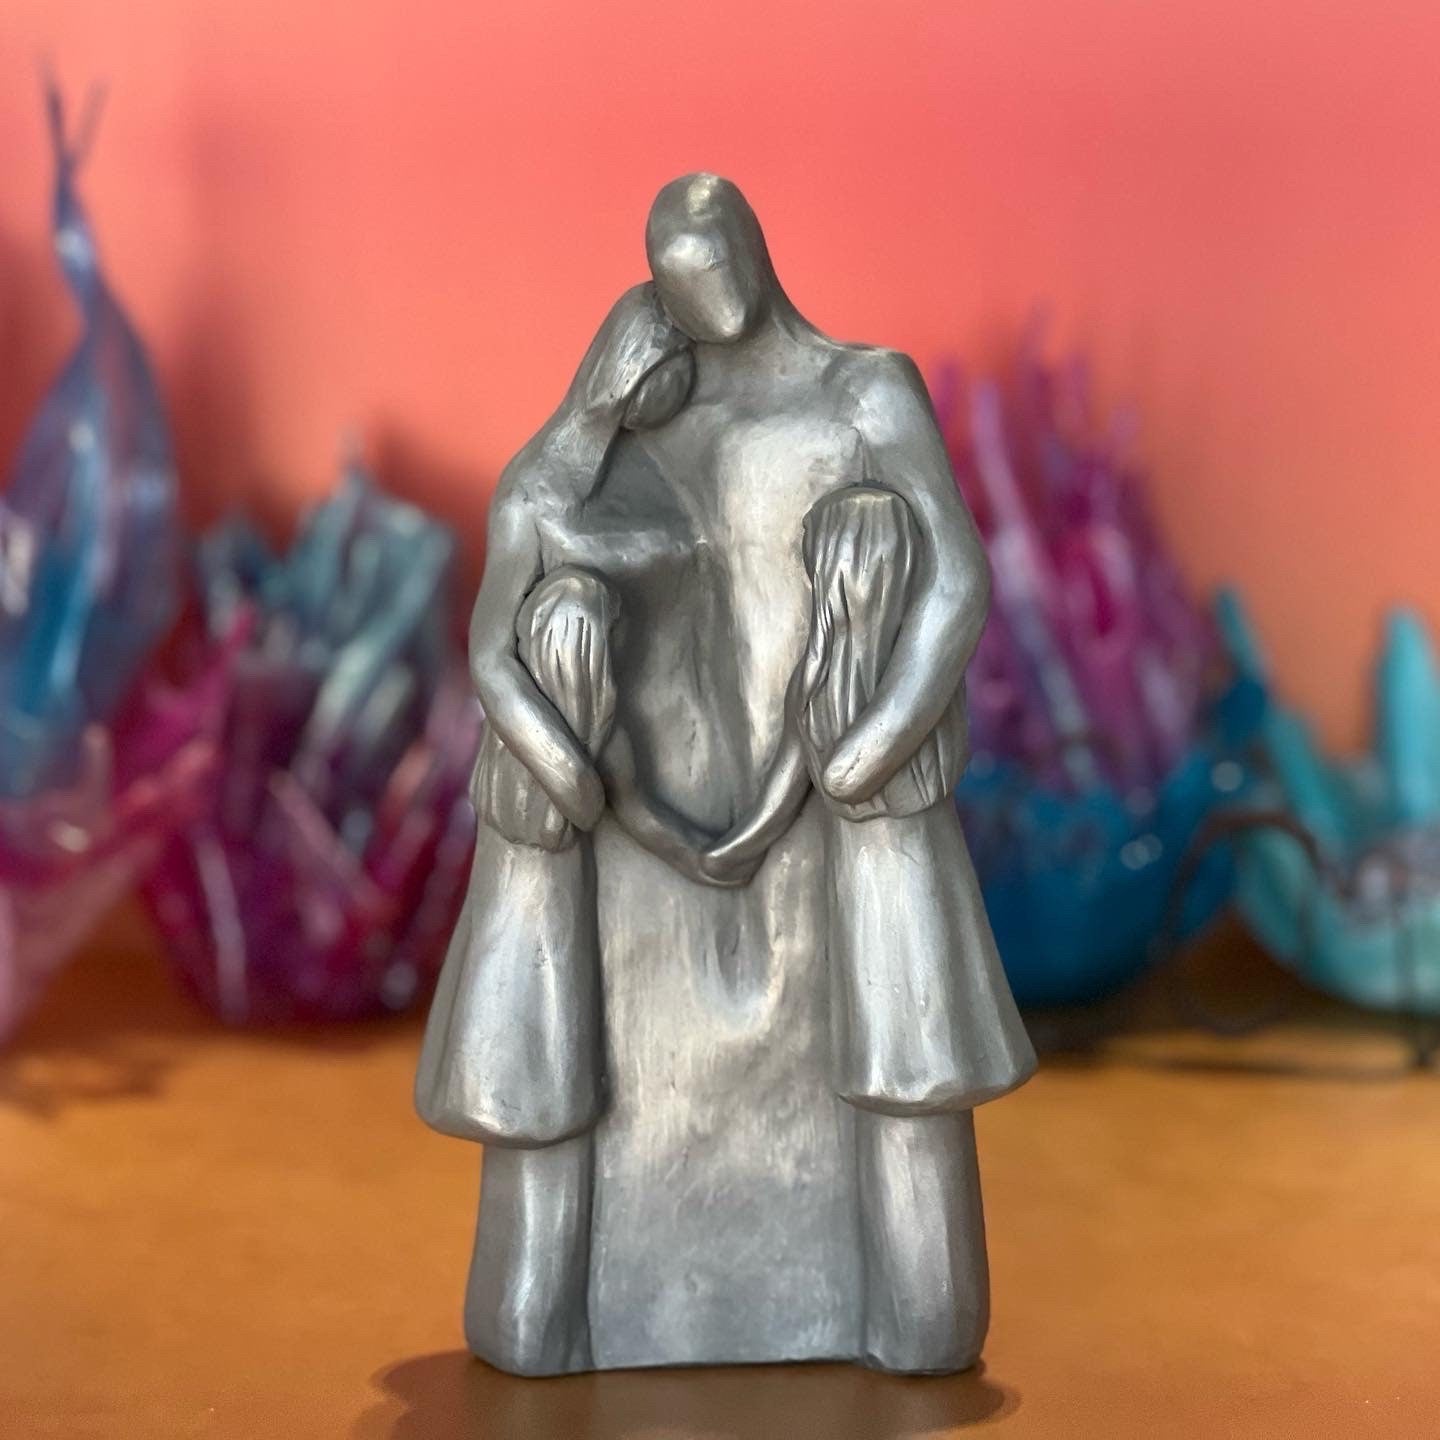 10 Year Anniversary Aluminum Sculpture, 10th Anniversary Family Portrait, Anniversary Gift for Men, Gift for Her Husband FO4-Older